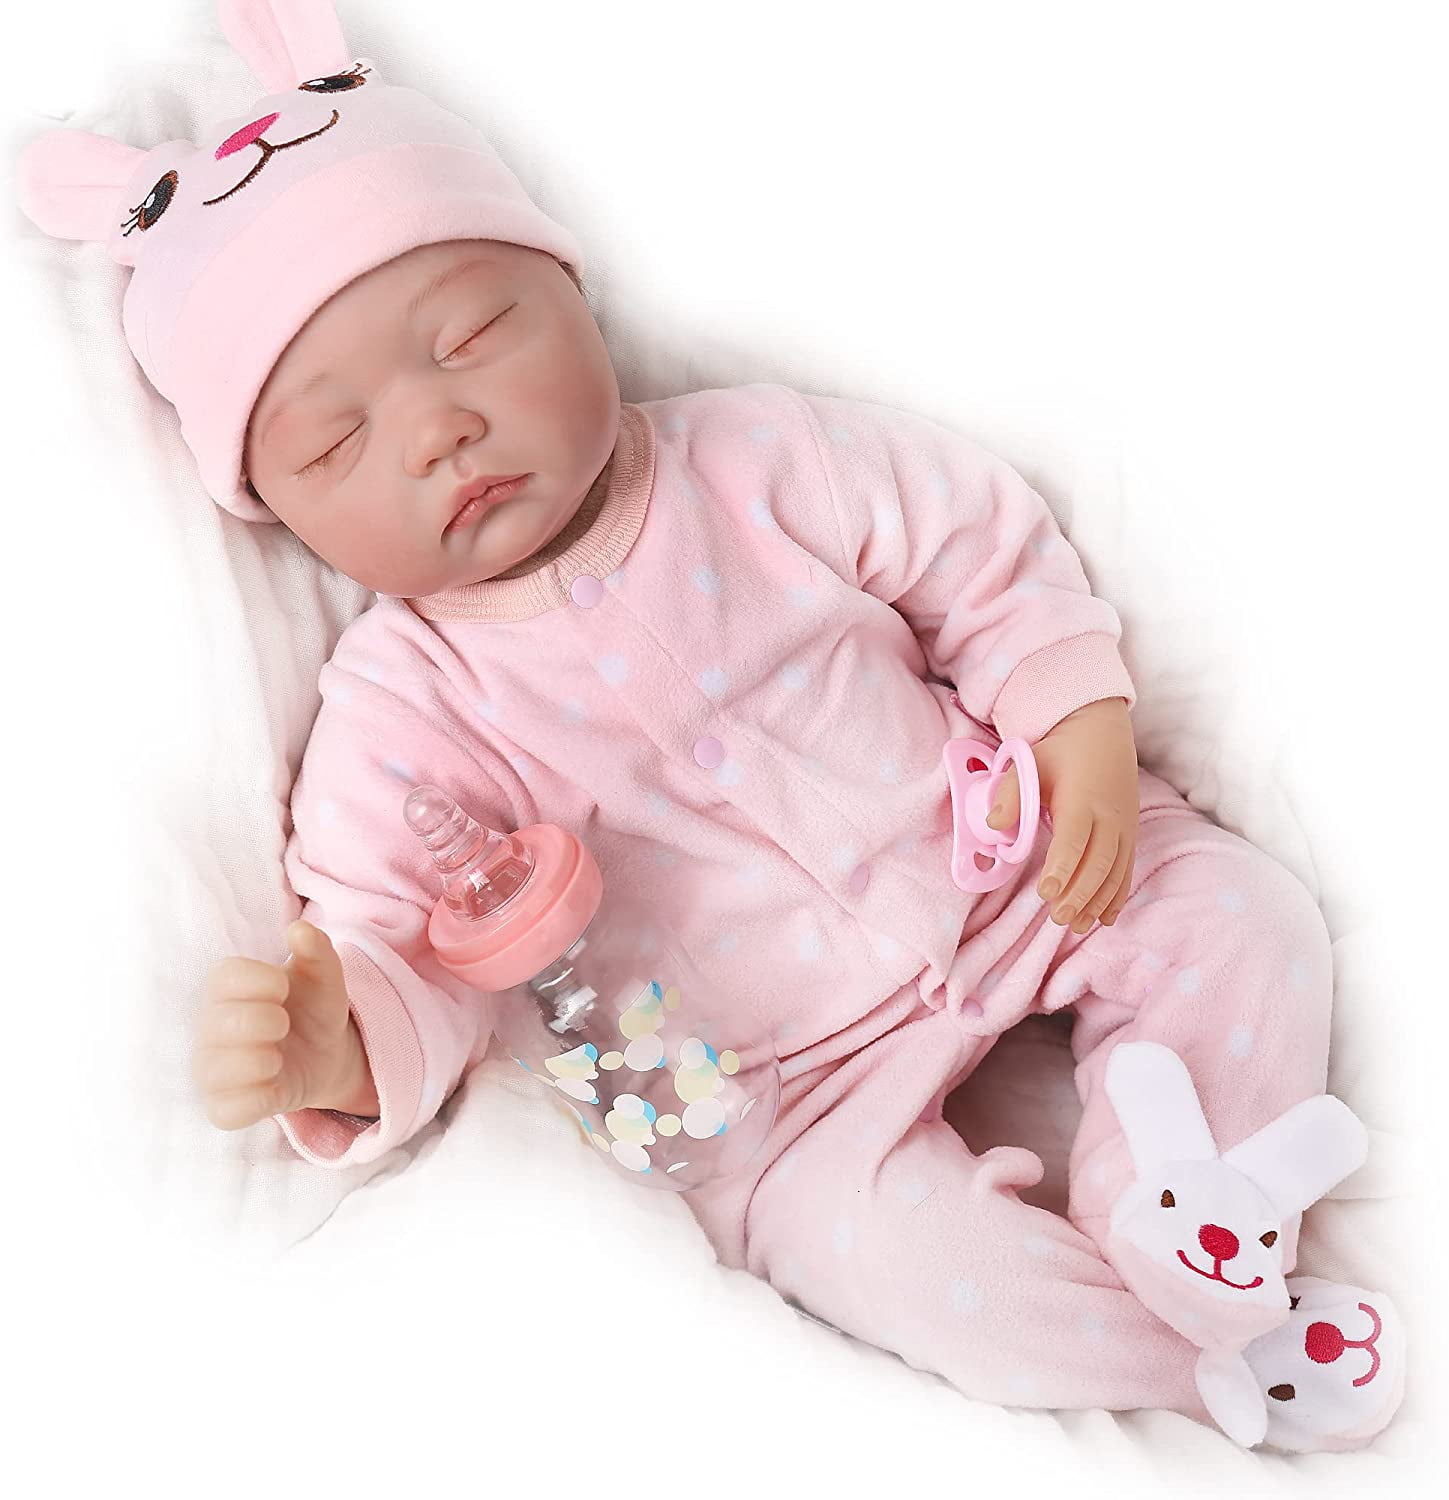 Reborn Baby Dolls 22 inch Lifelike Sleeping Baby Doll Silicone Weighted Realistic Newborn Dolls Toy Gift Set for Children Age 3+ 